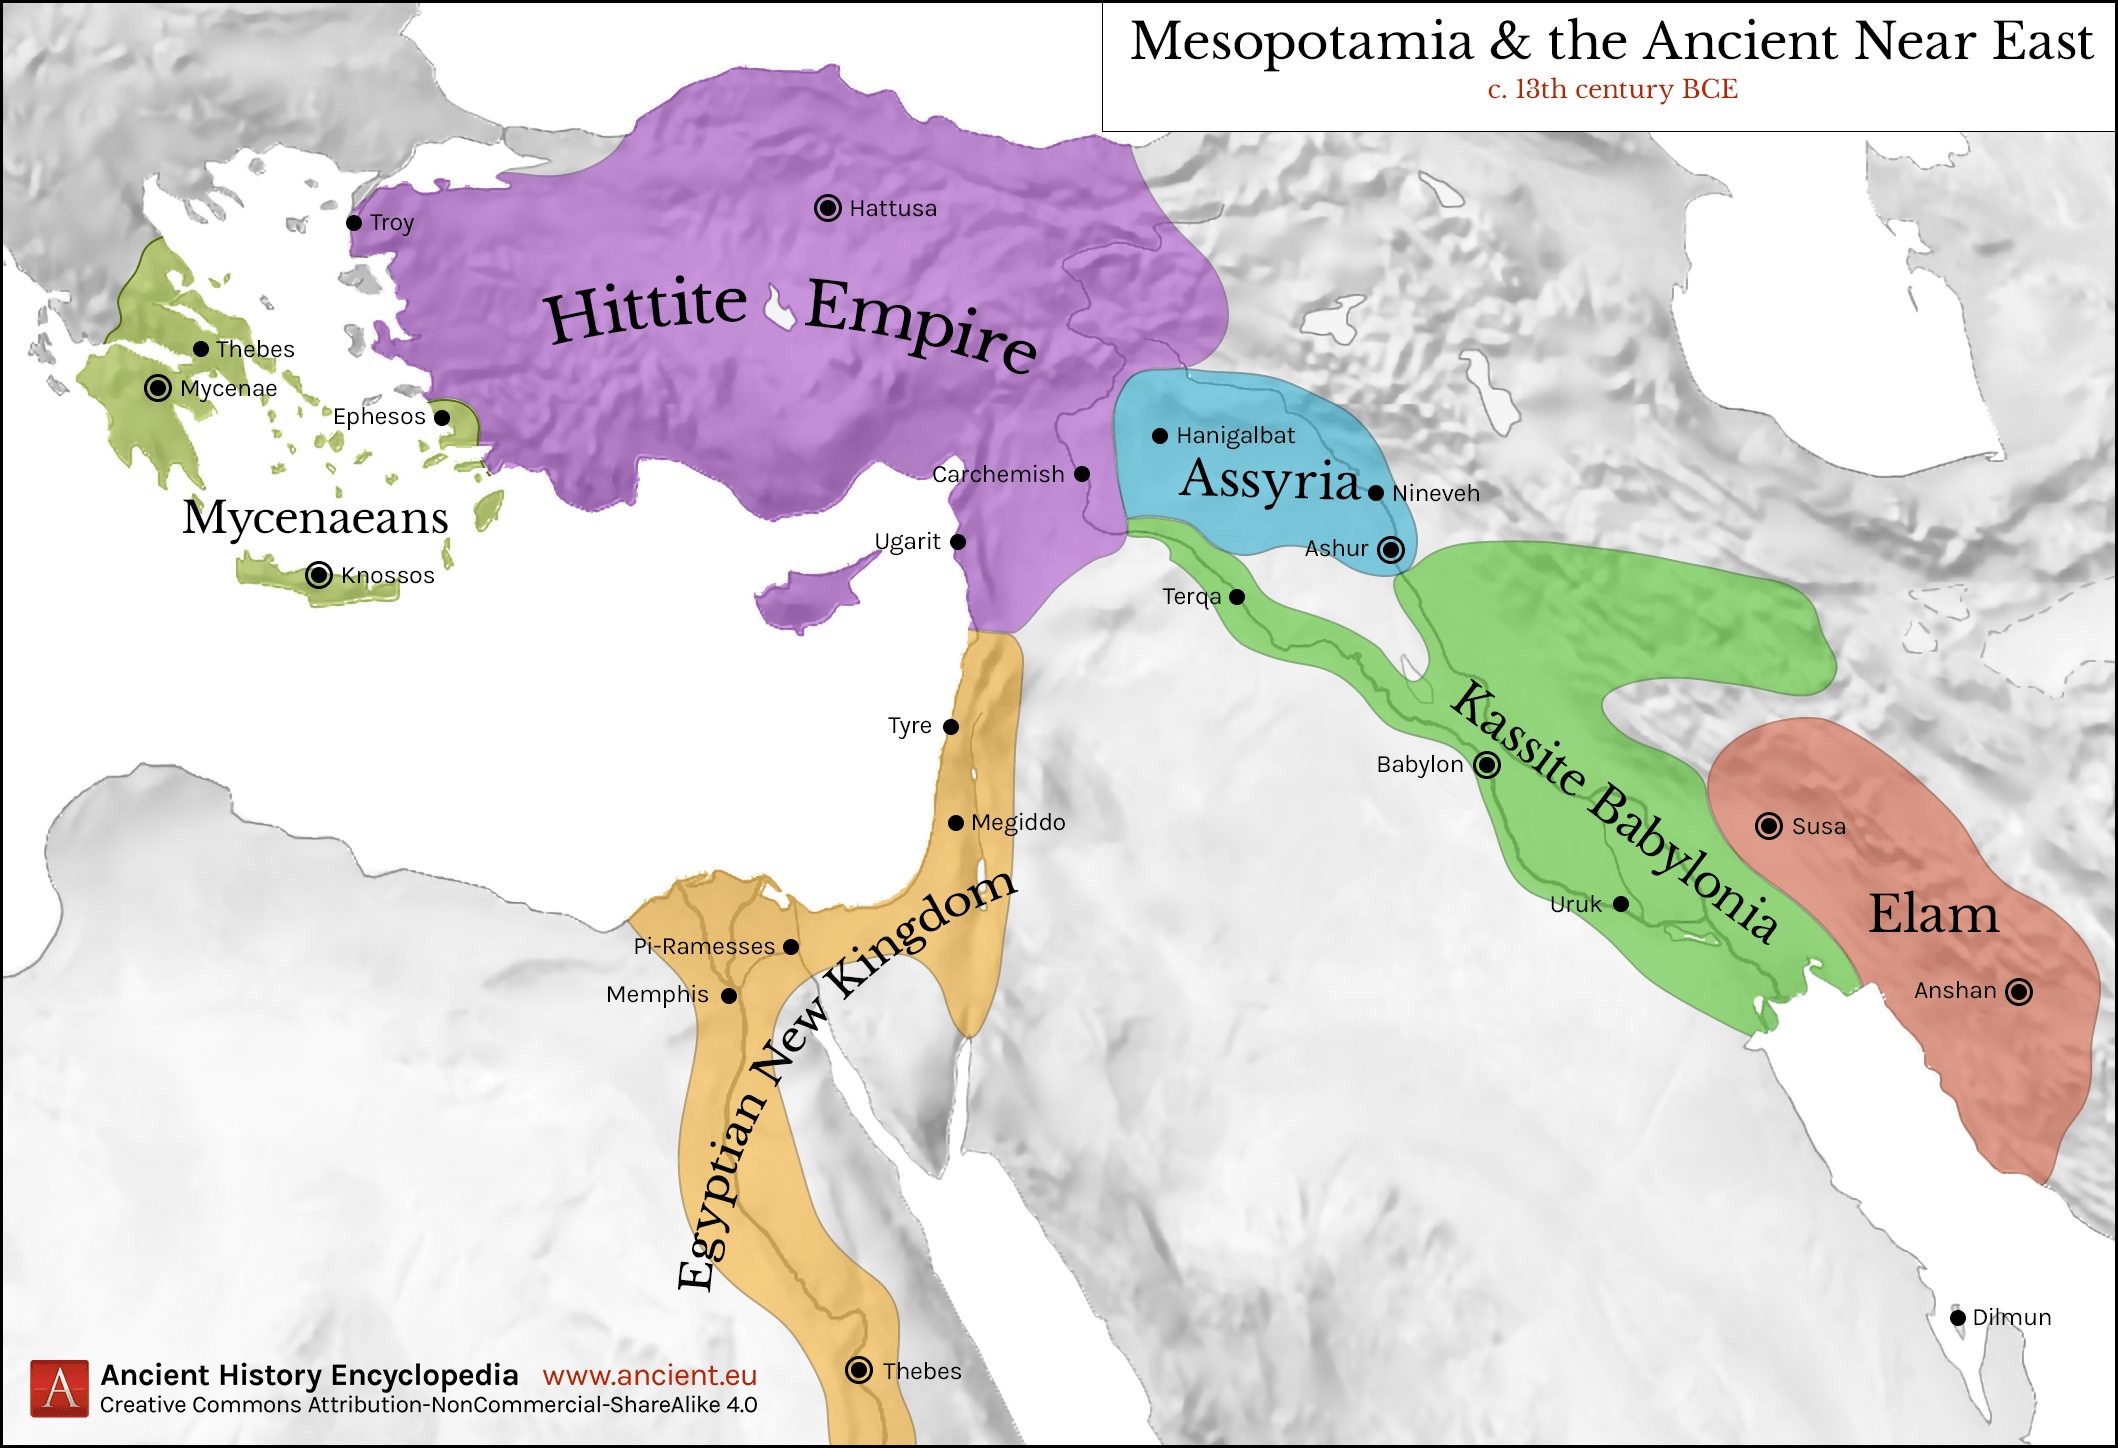 Map of Mesopotamia and the Ancient Near East, c. 1300 BCE ...